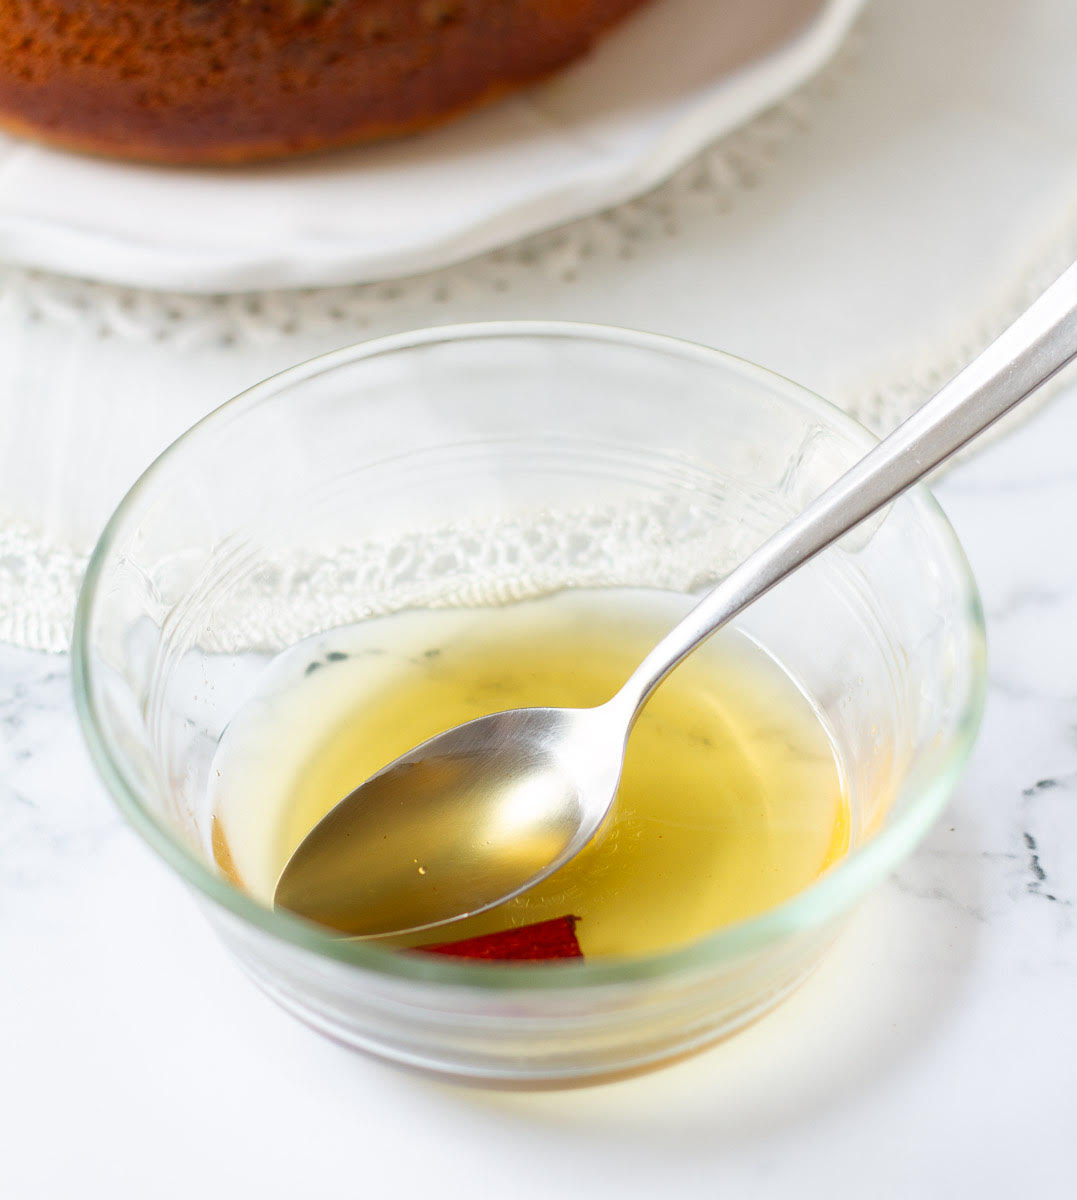 Syrup for the cake in a small bowl